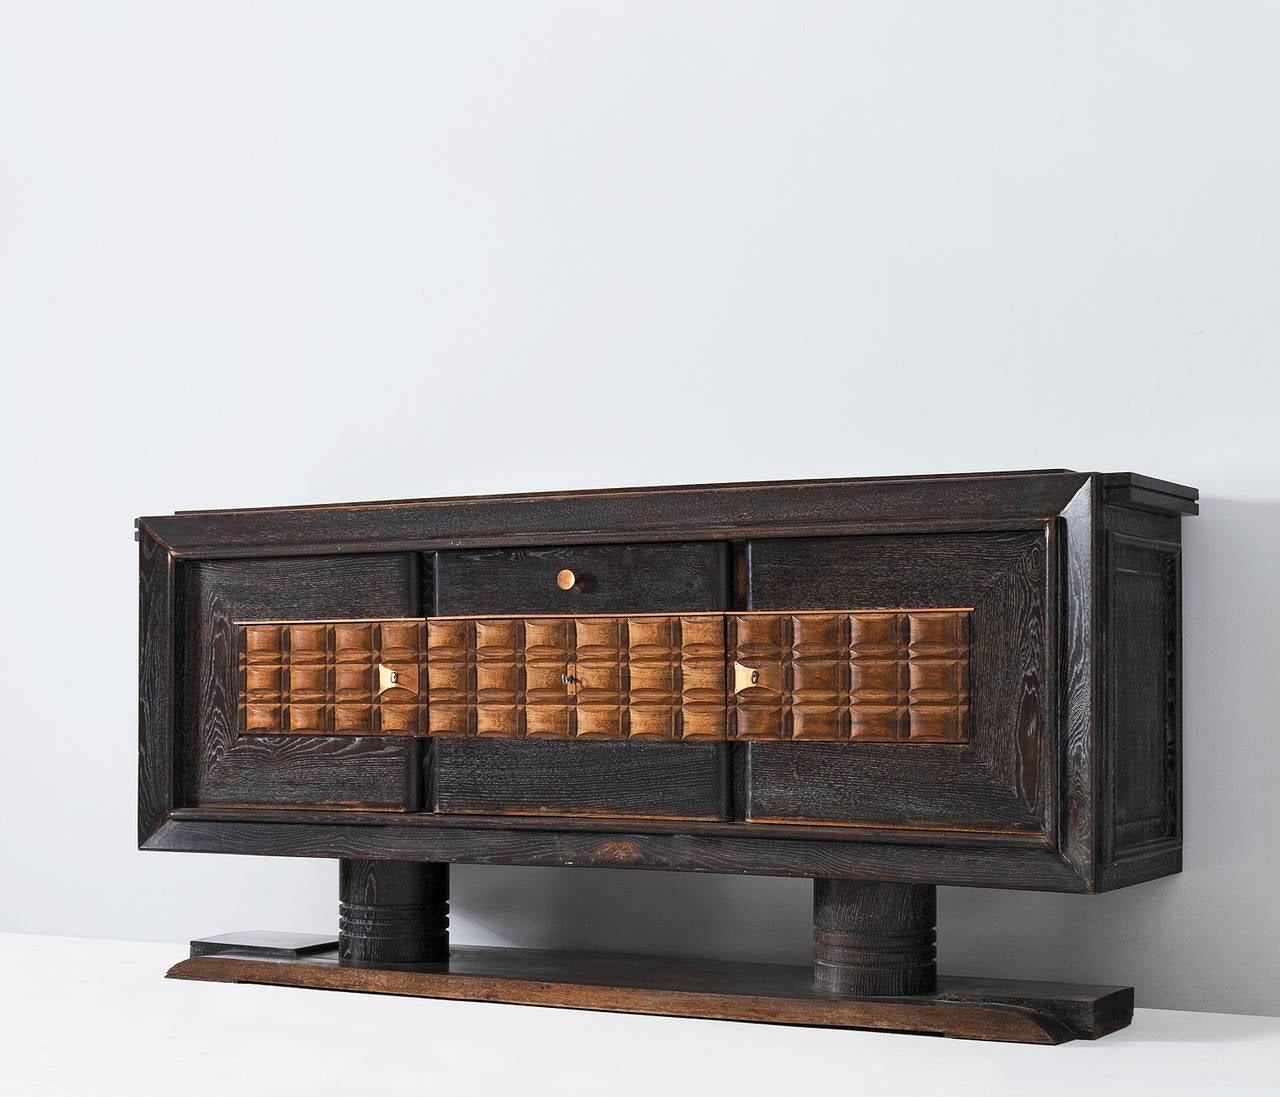 Sideboard in oak and copper by Charles Dudouyt, France, 1930s.

This French Art Deco oak credenza originates from the 1930s and is designed by the French decorator Charles Dudouyt. The door panels show an interesting pattern of solid natural wooden